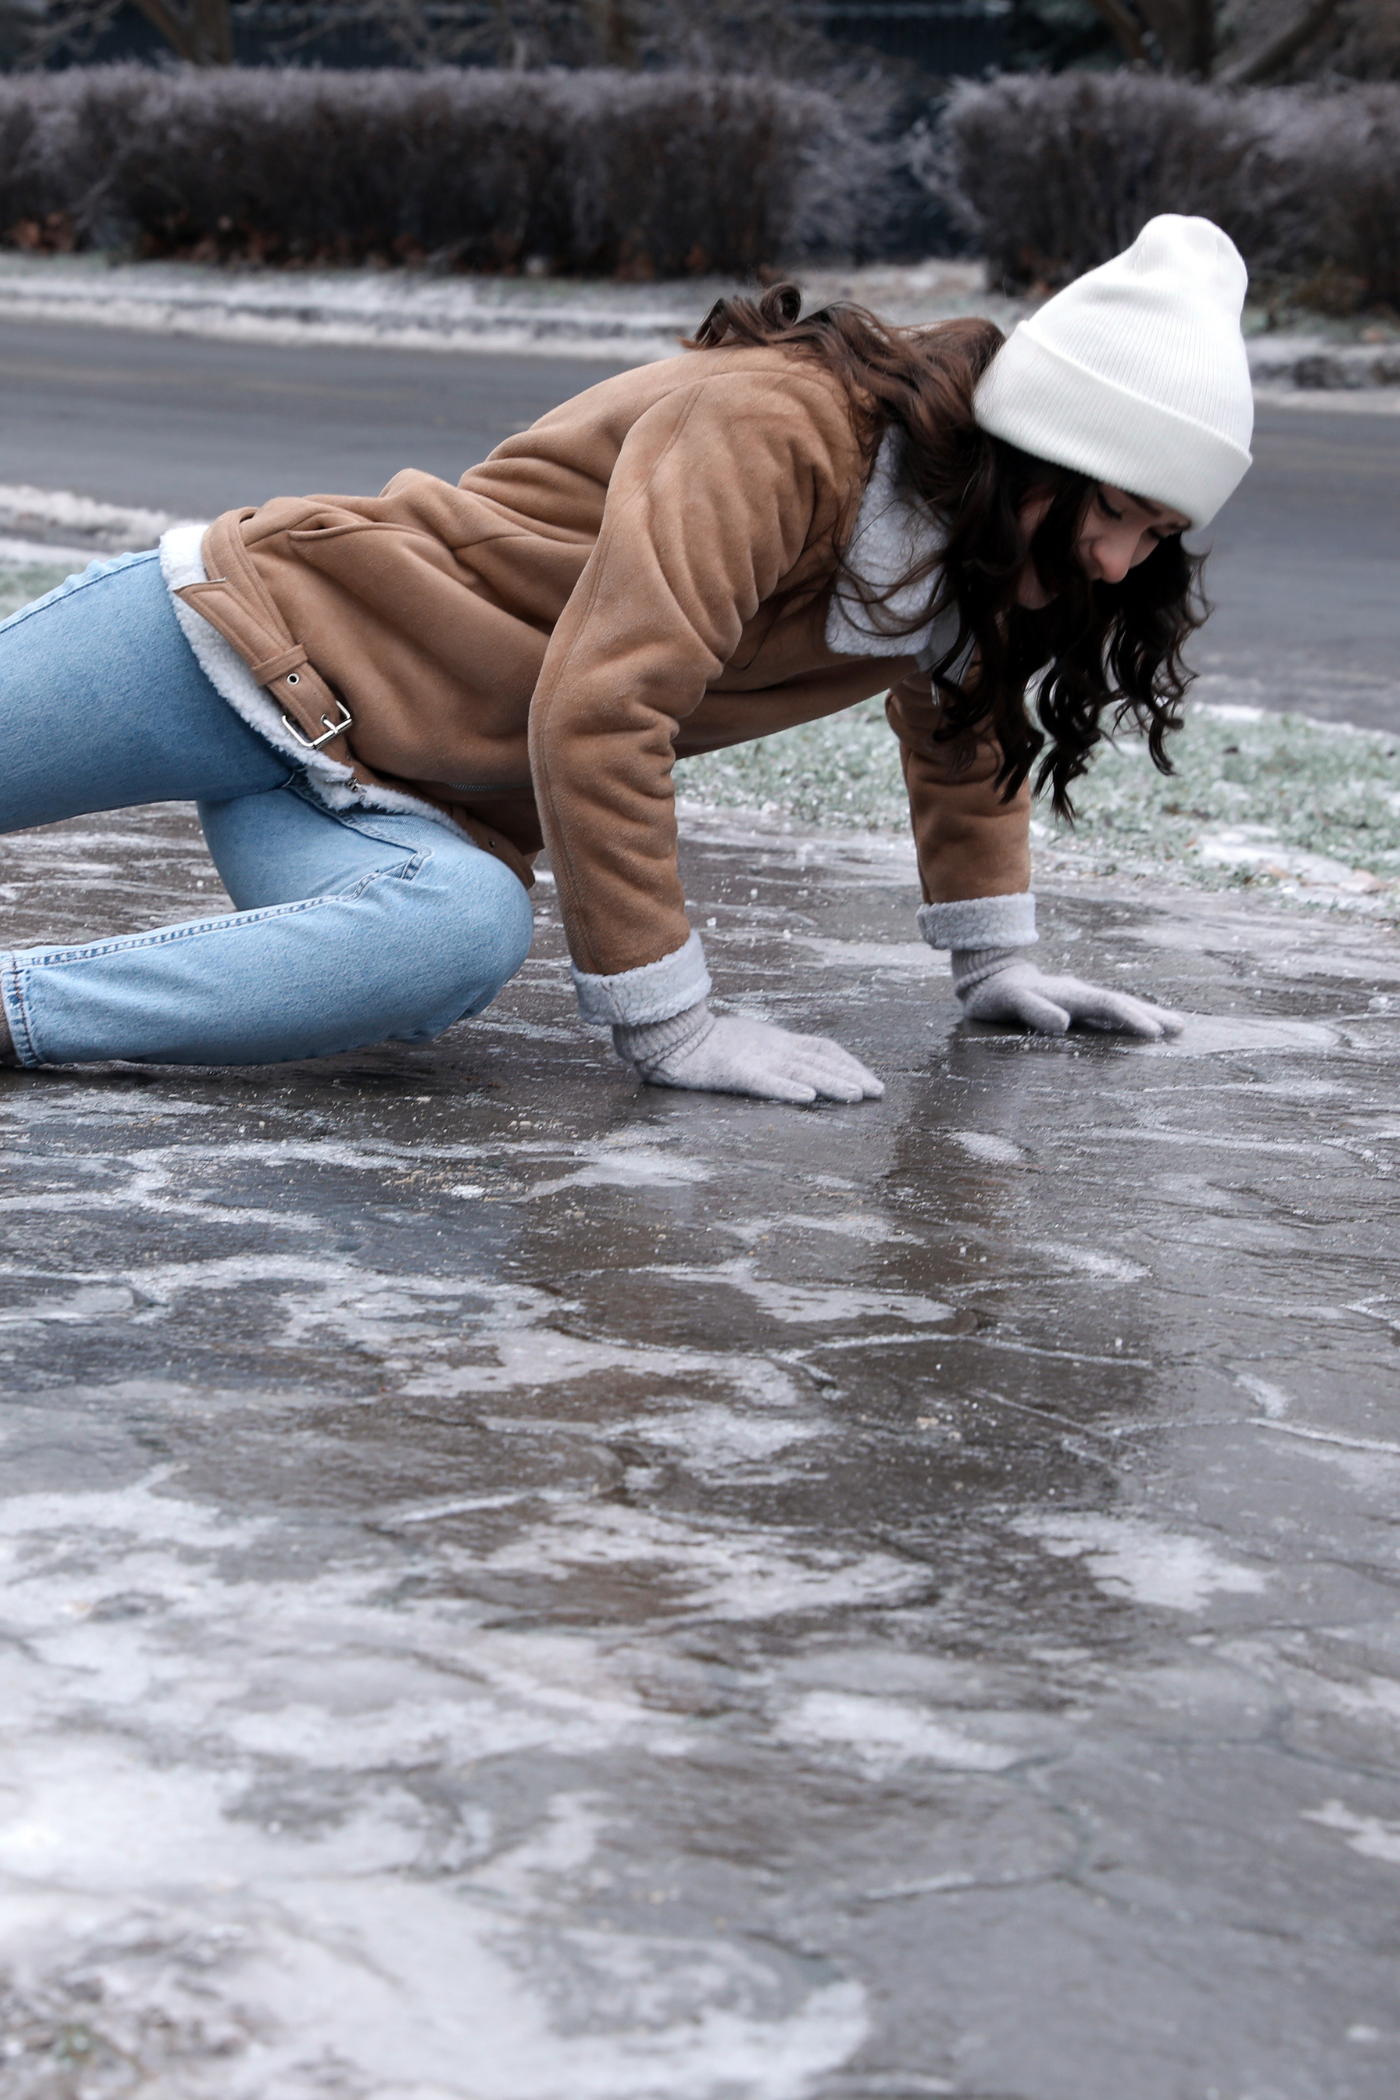 a woman is crawling on the ice on the side of the road .